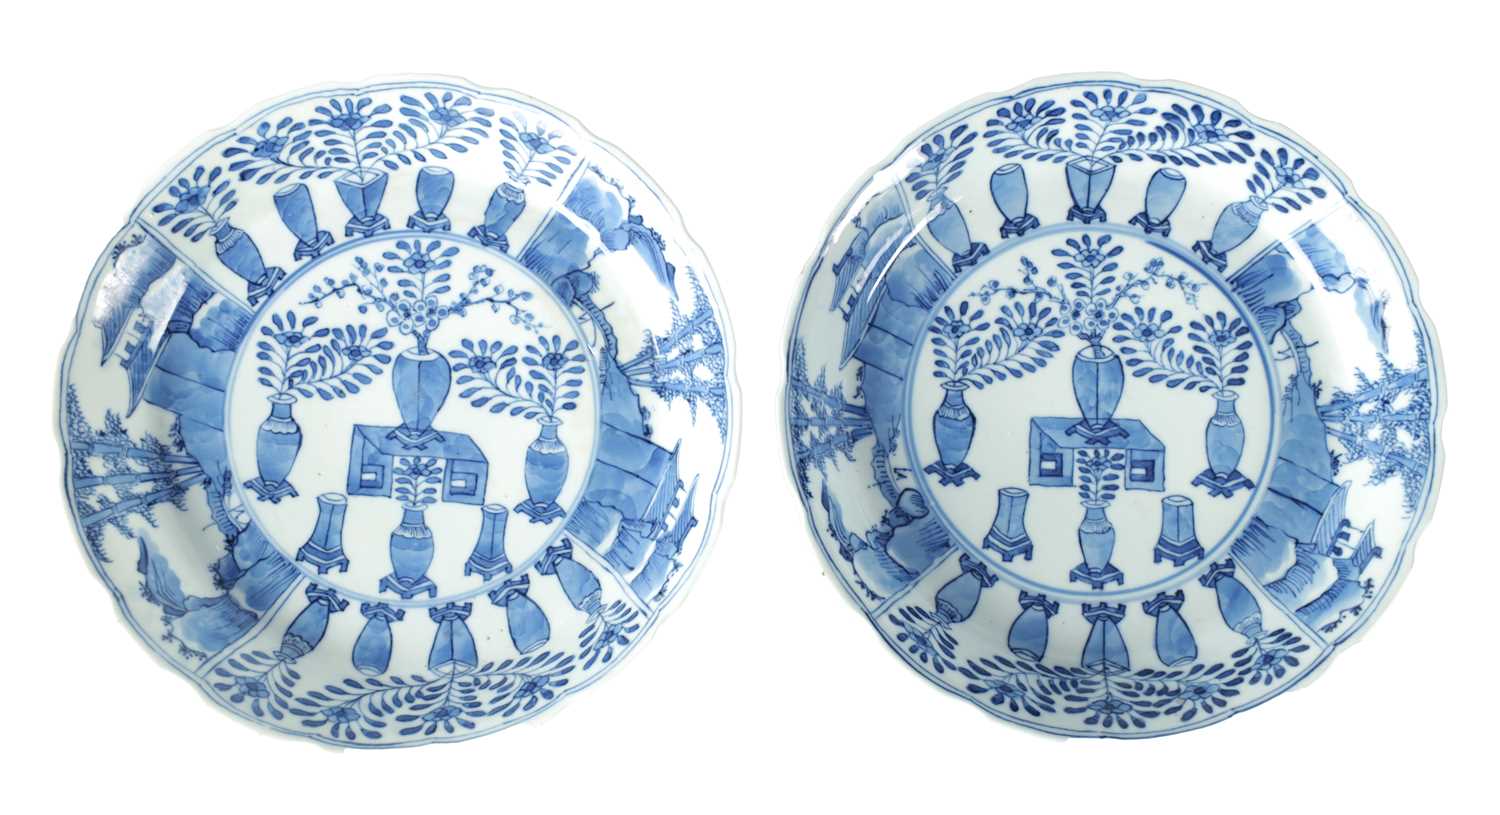 A PAIR OF 18TH/19TH CENTURY CHINESE BLUE & WHITE PORCELAIN BOWLS